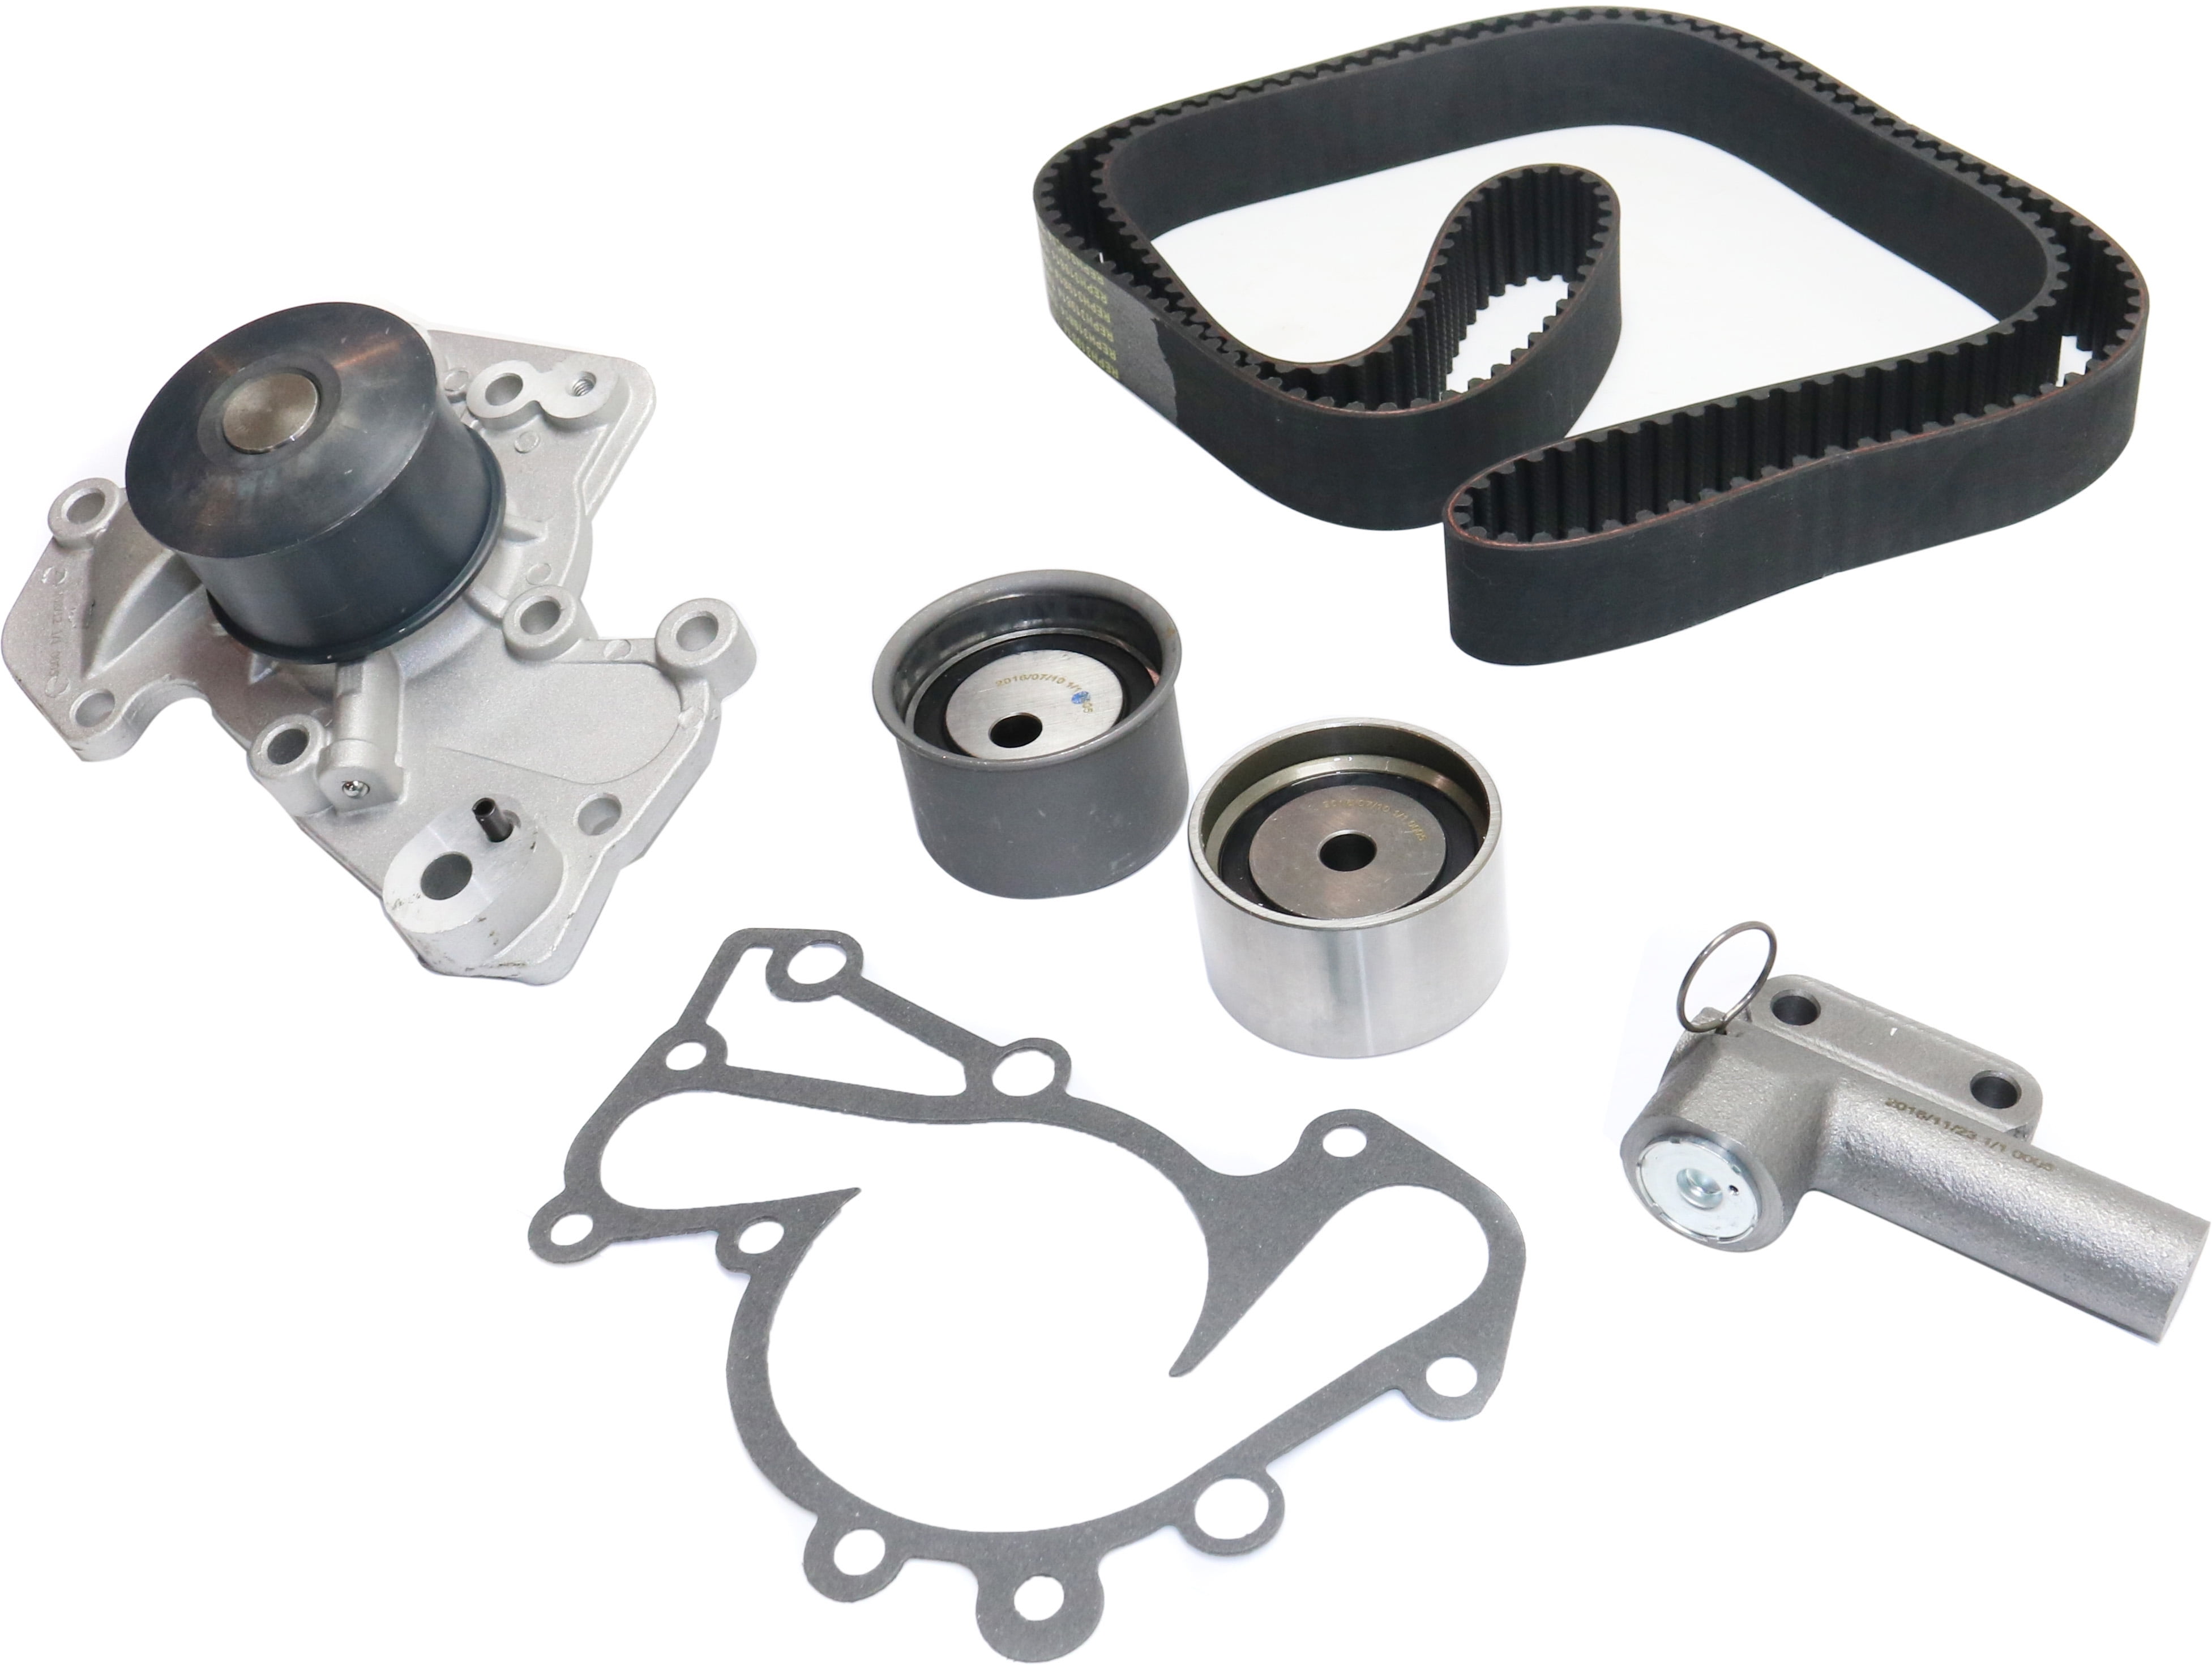 Replacement REPH319814 Timing Belt Kit Compatible with 1999-2005 Hyundai  Sonata 2001-2005 Kia Optima 6Cyl 2.7L 2.5L Water Pump Included 